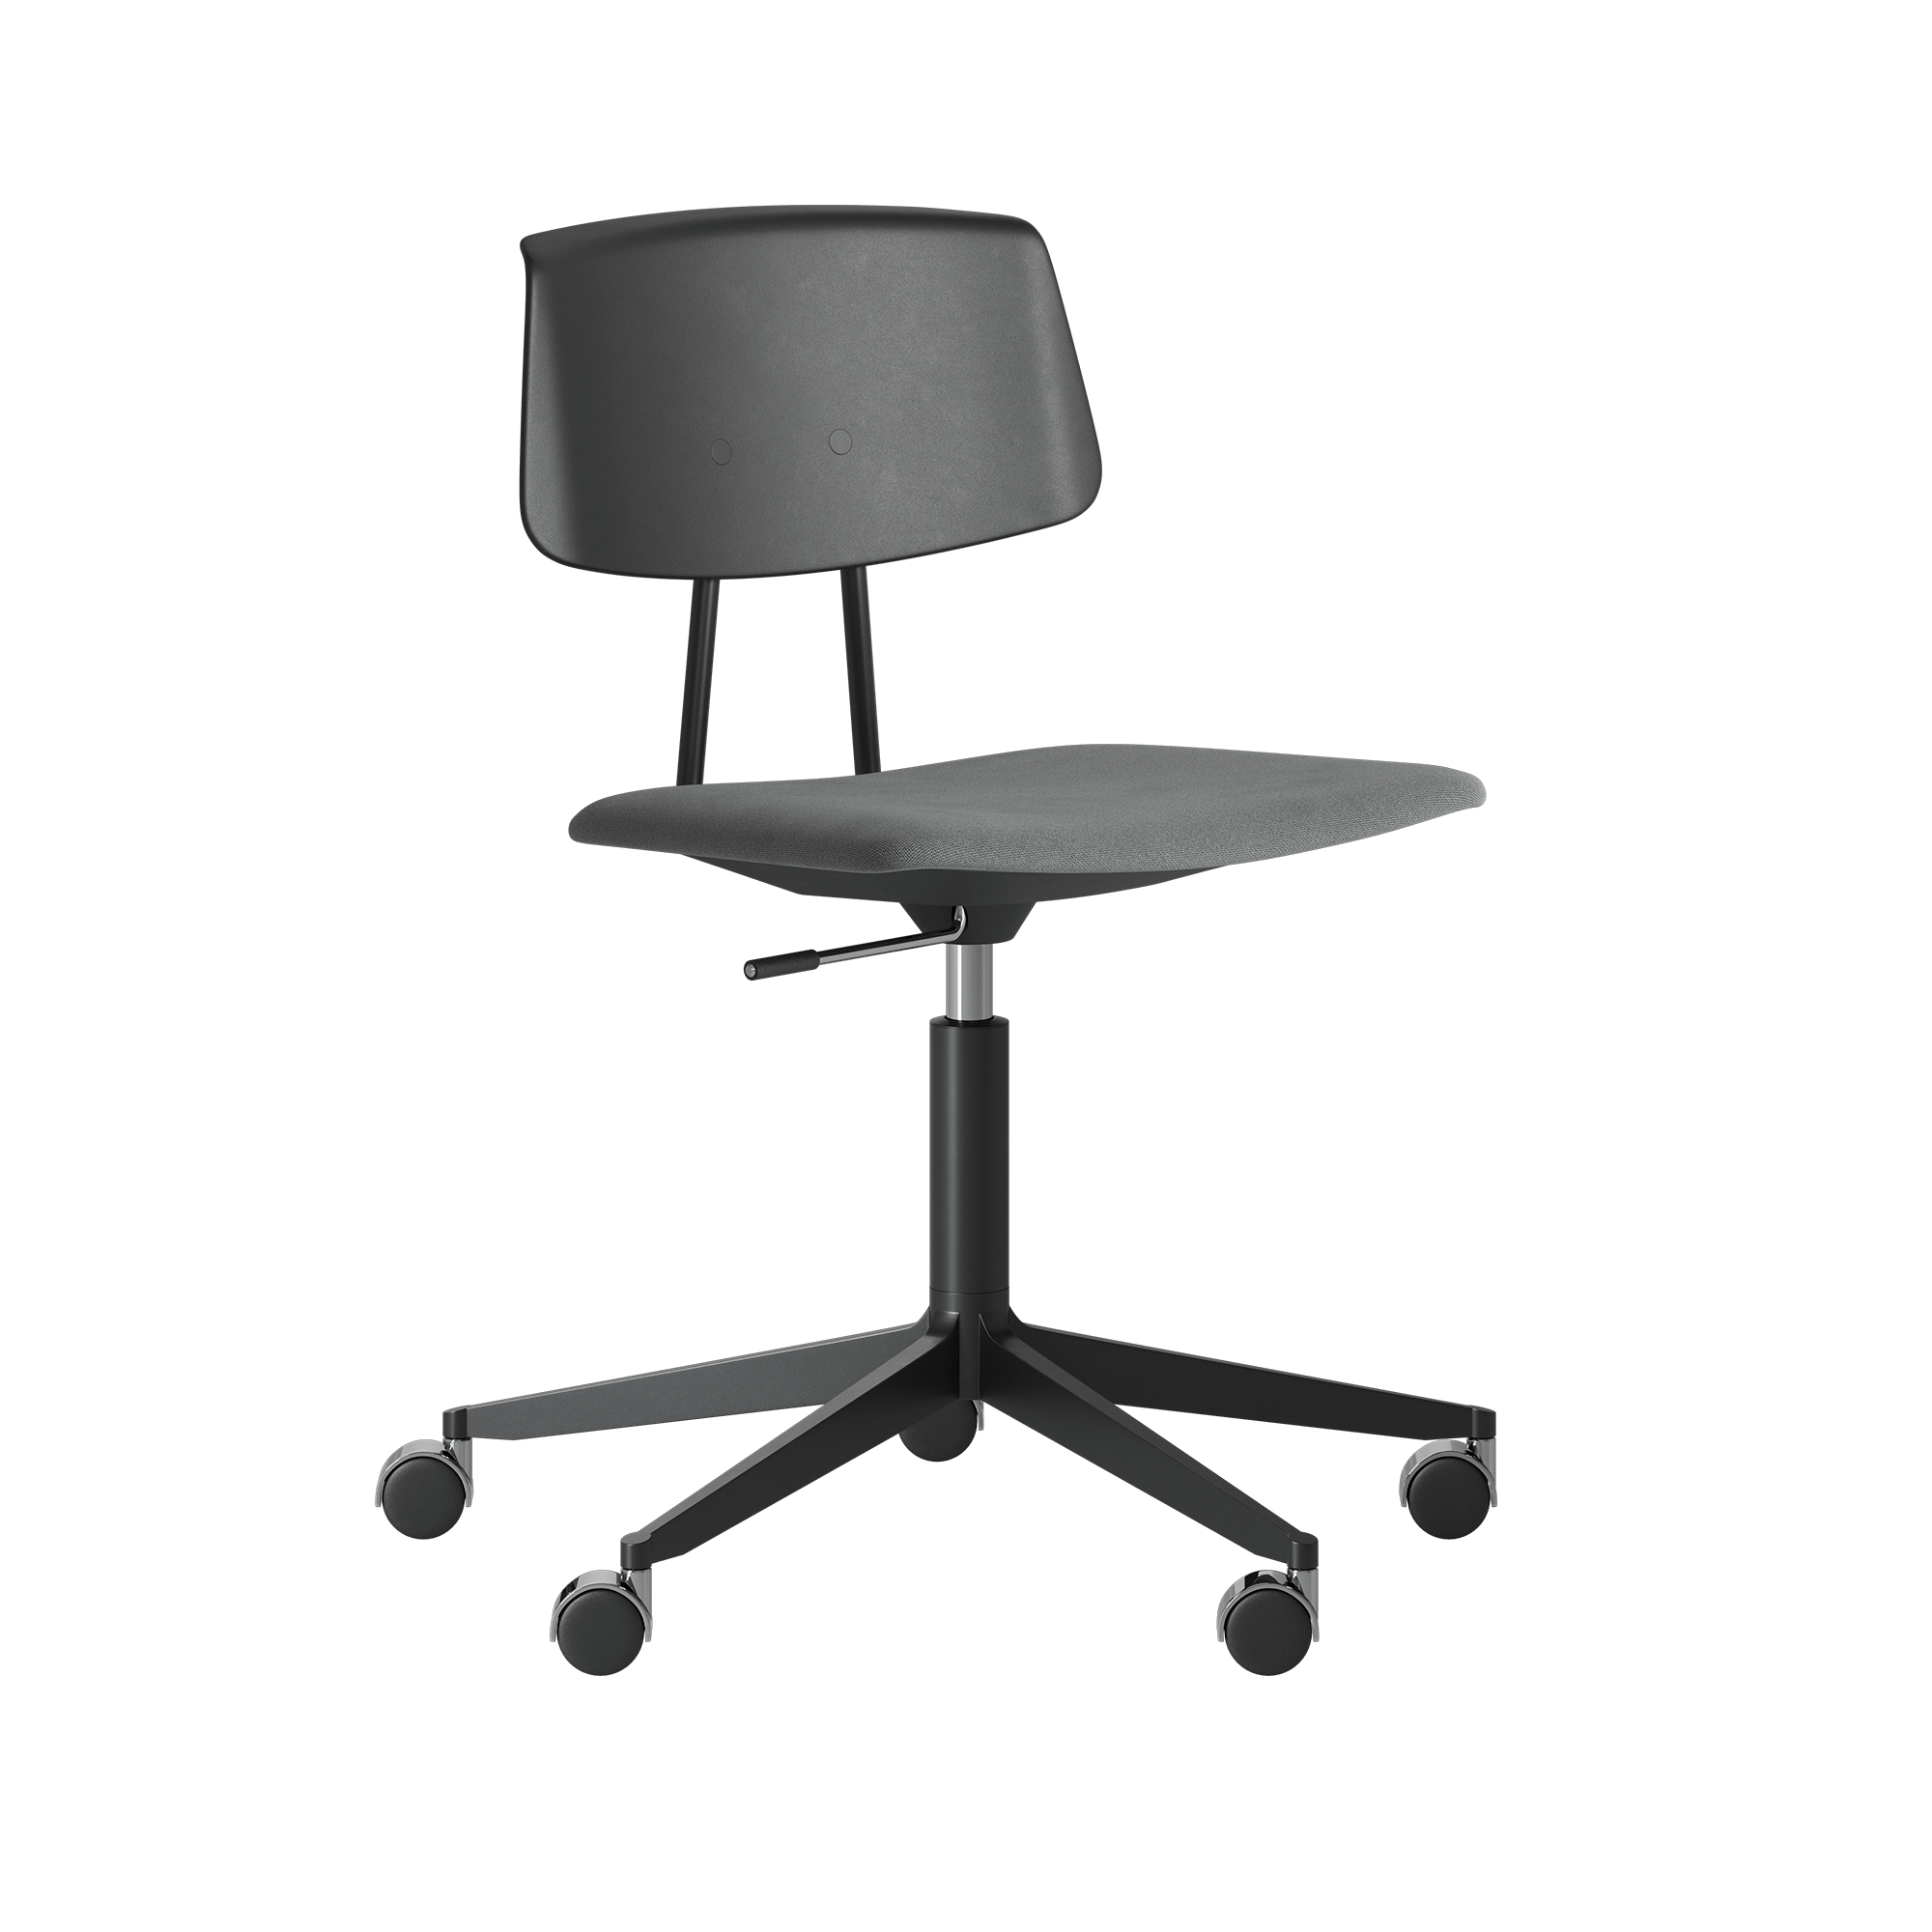 A Share Move Alu 40 office desk chair